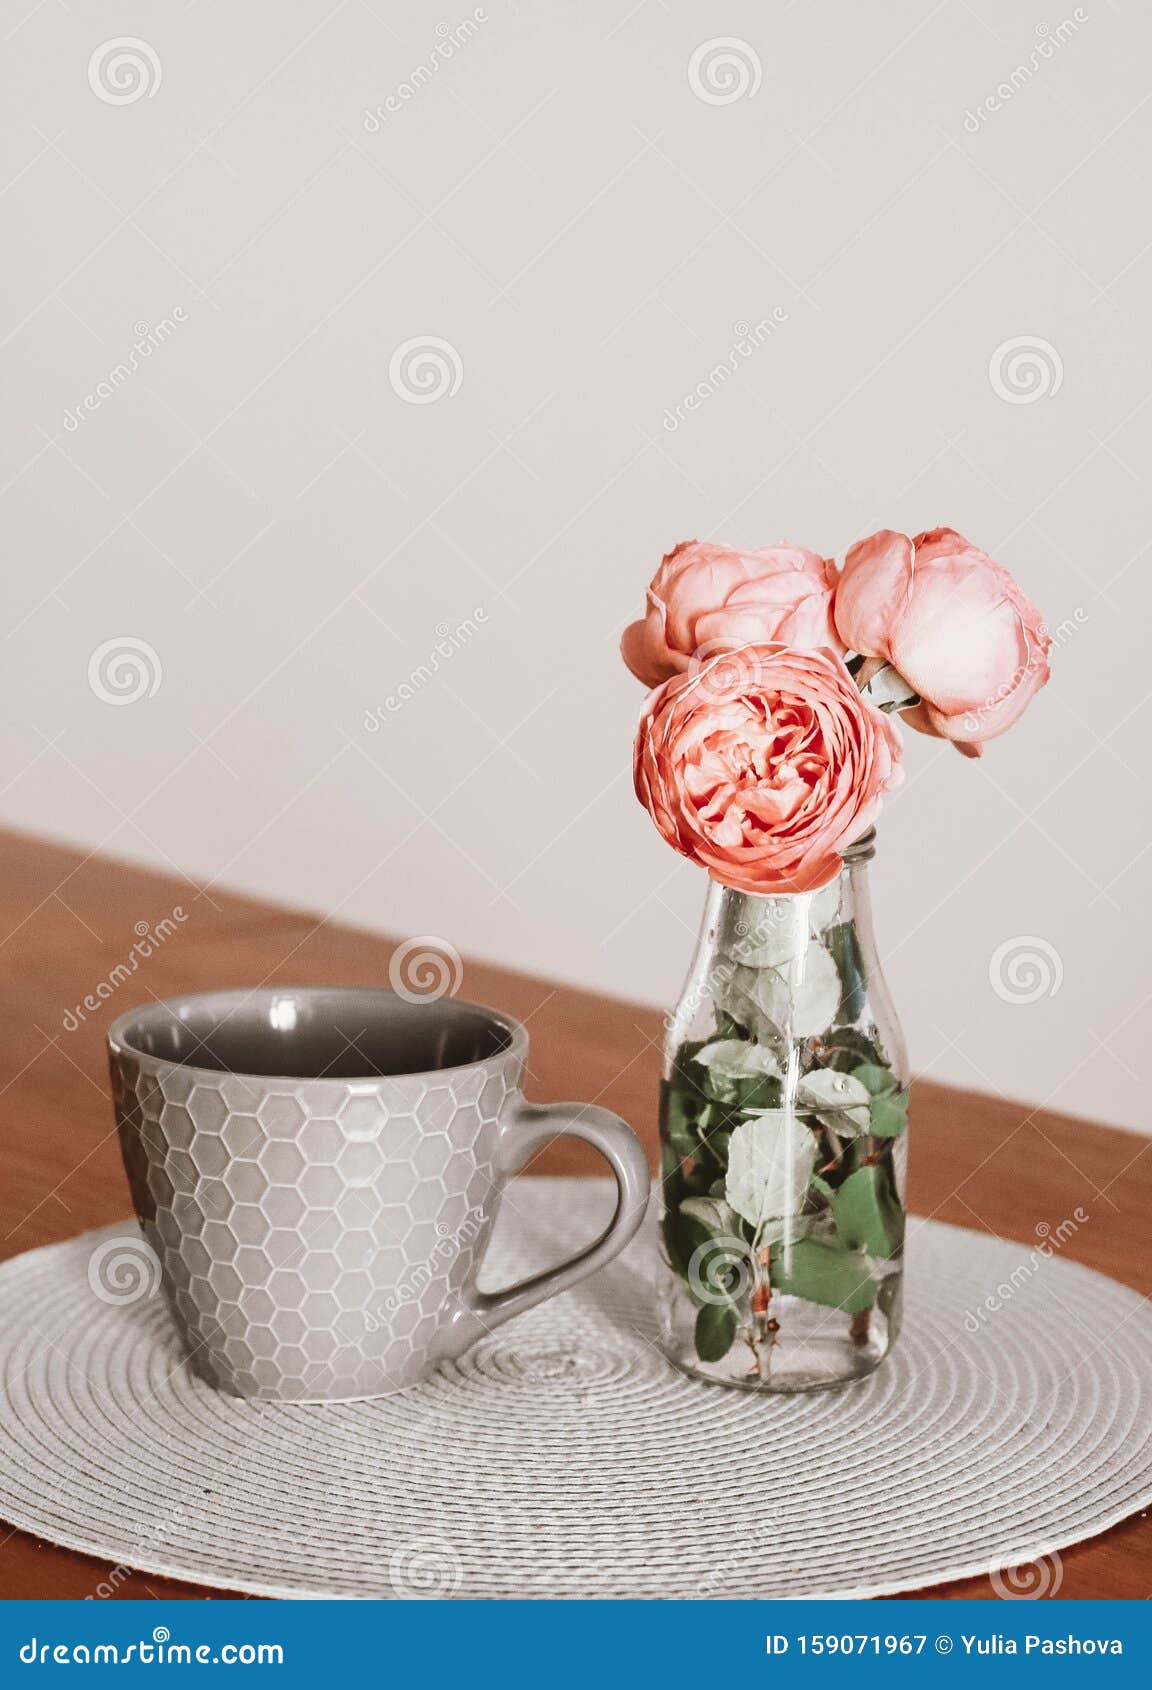 Three Pink Roses And Big Cup Of Tee Stock Image Image Of Human Background 159071967